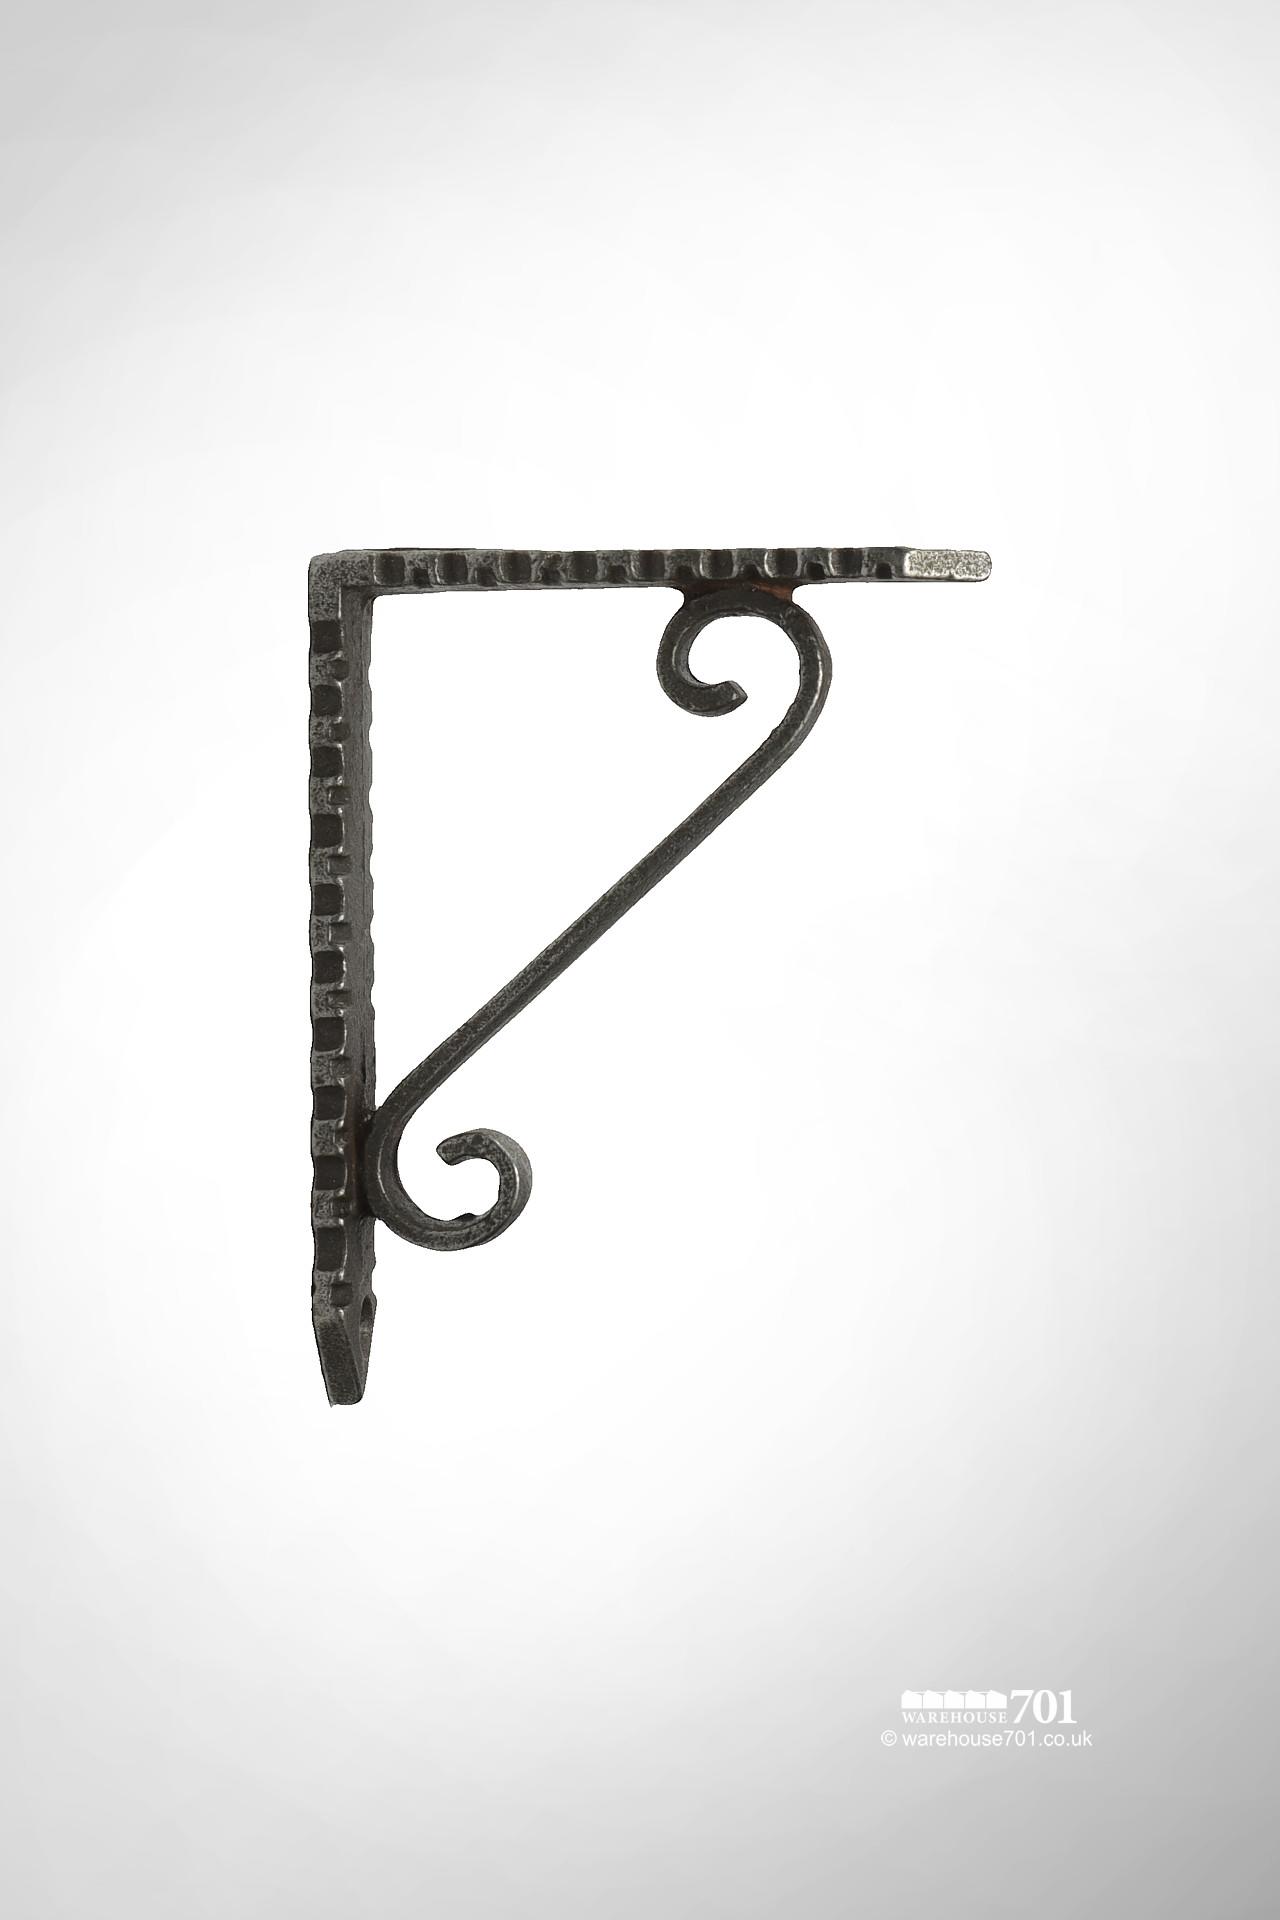 New Cast Iron Shelf or Wall Bracket with a Gothic Scroll Design #2